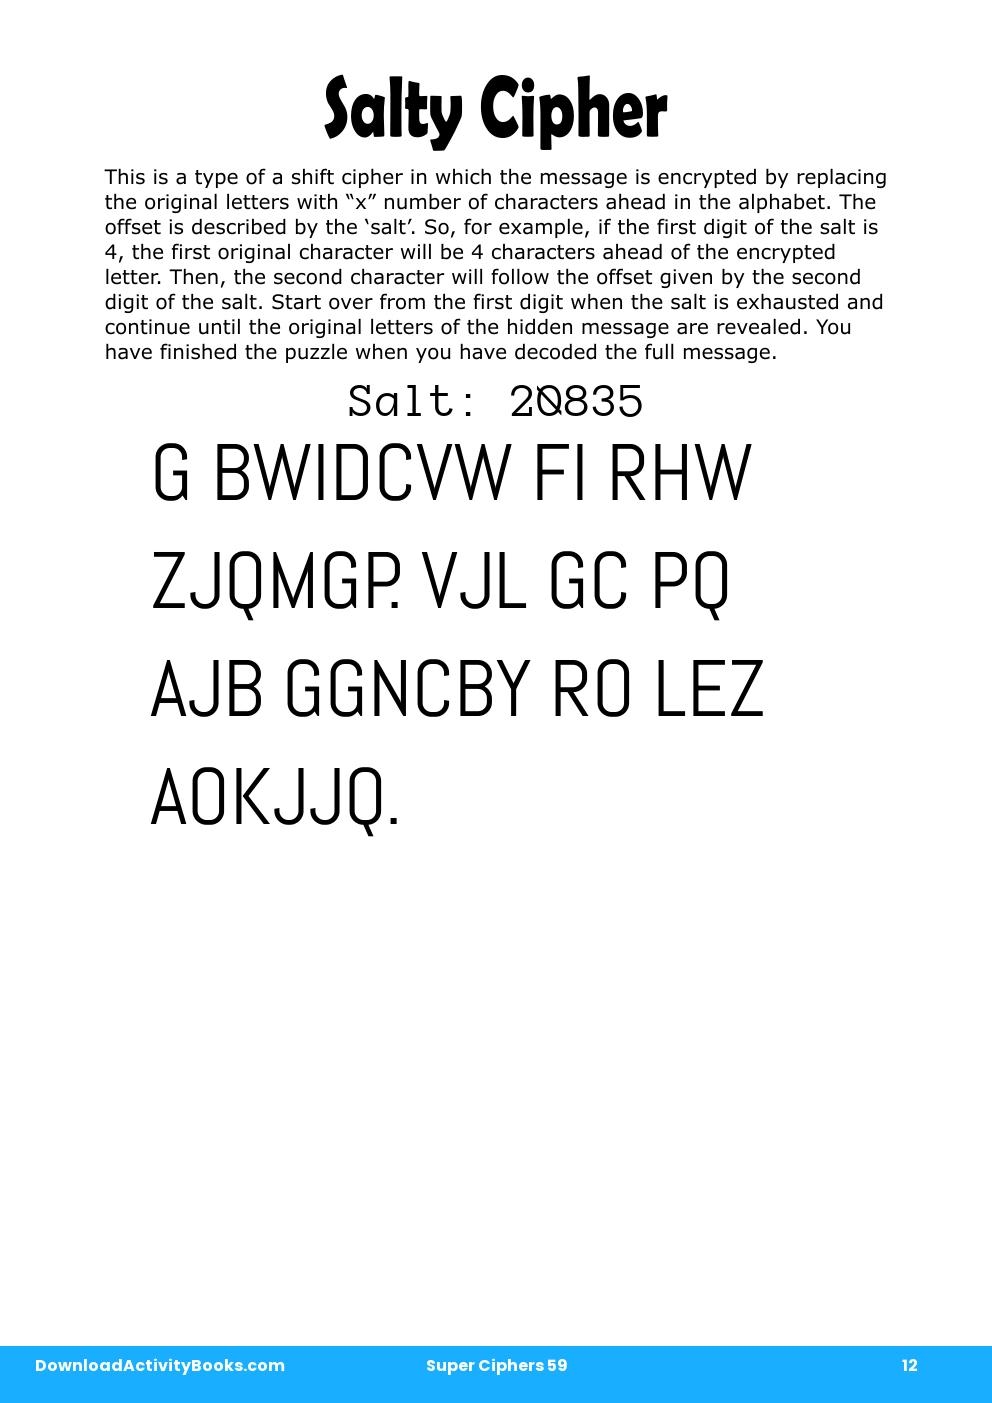 Salty Cipher in Super Ciphers 59